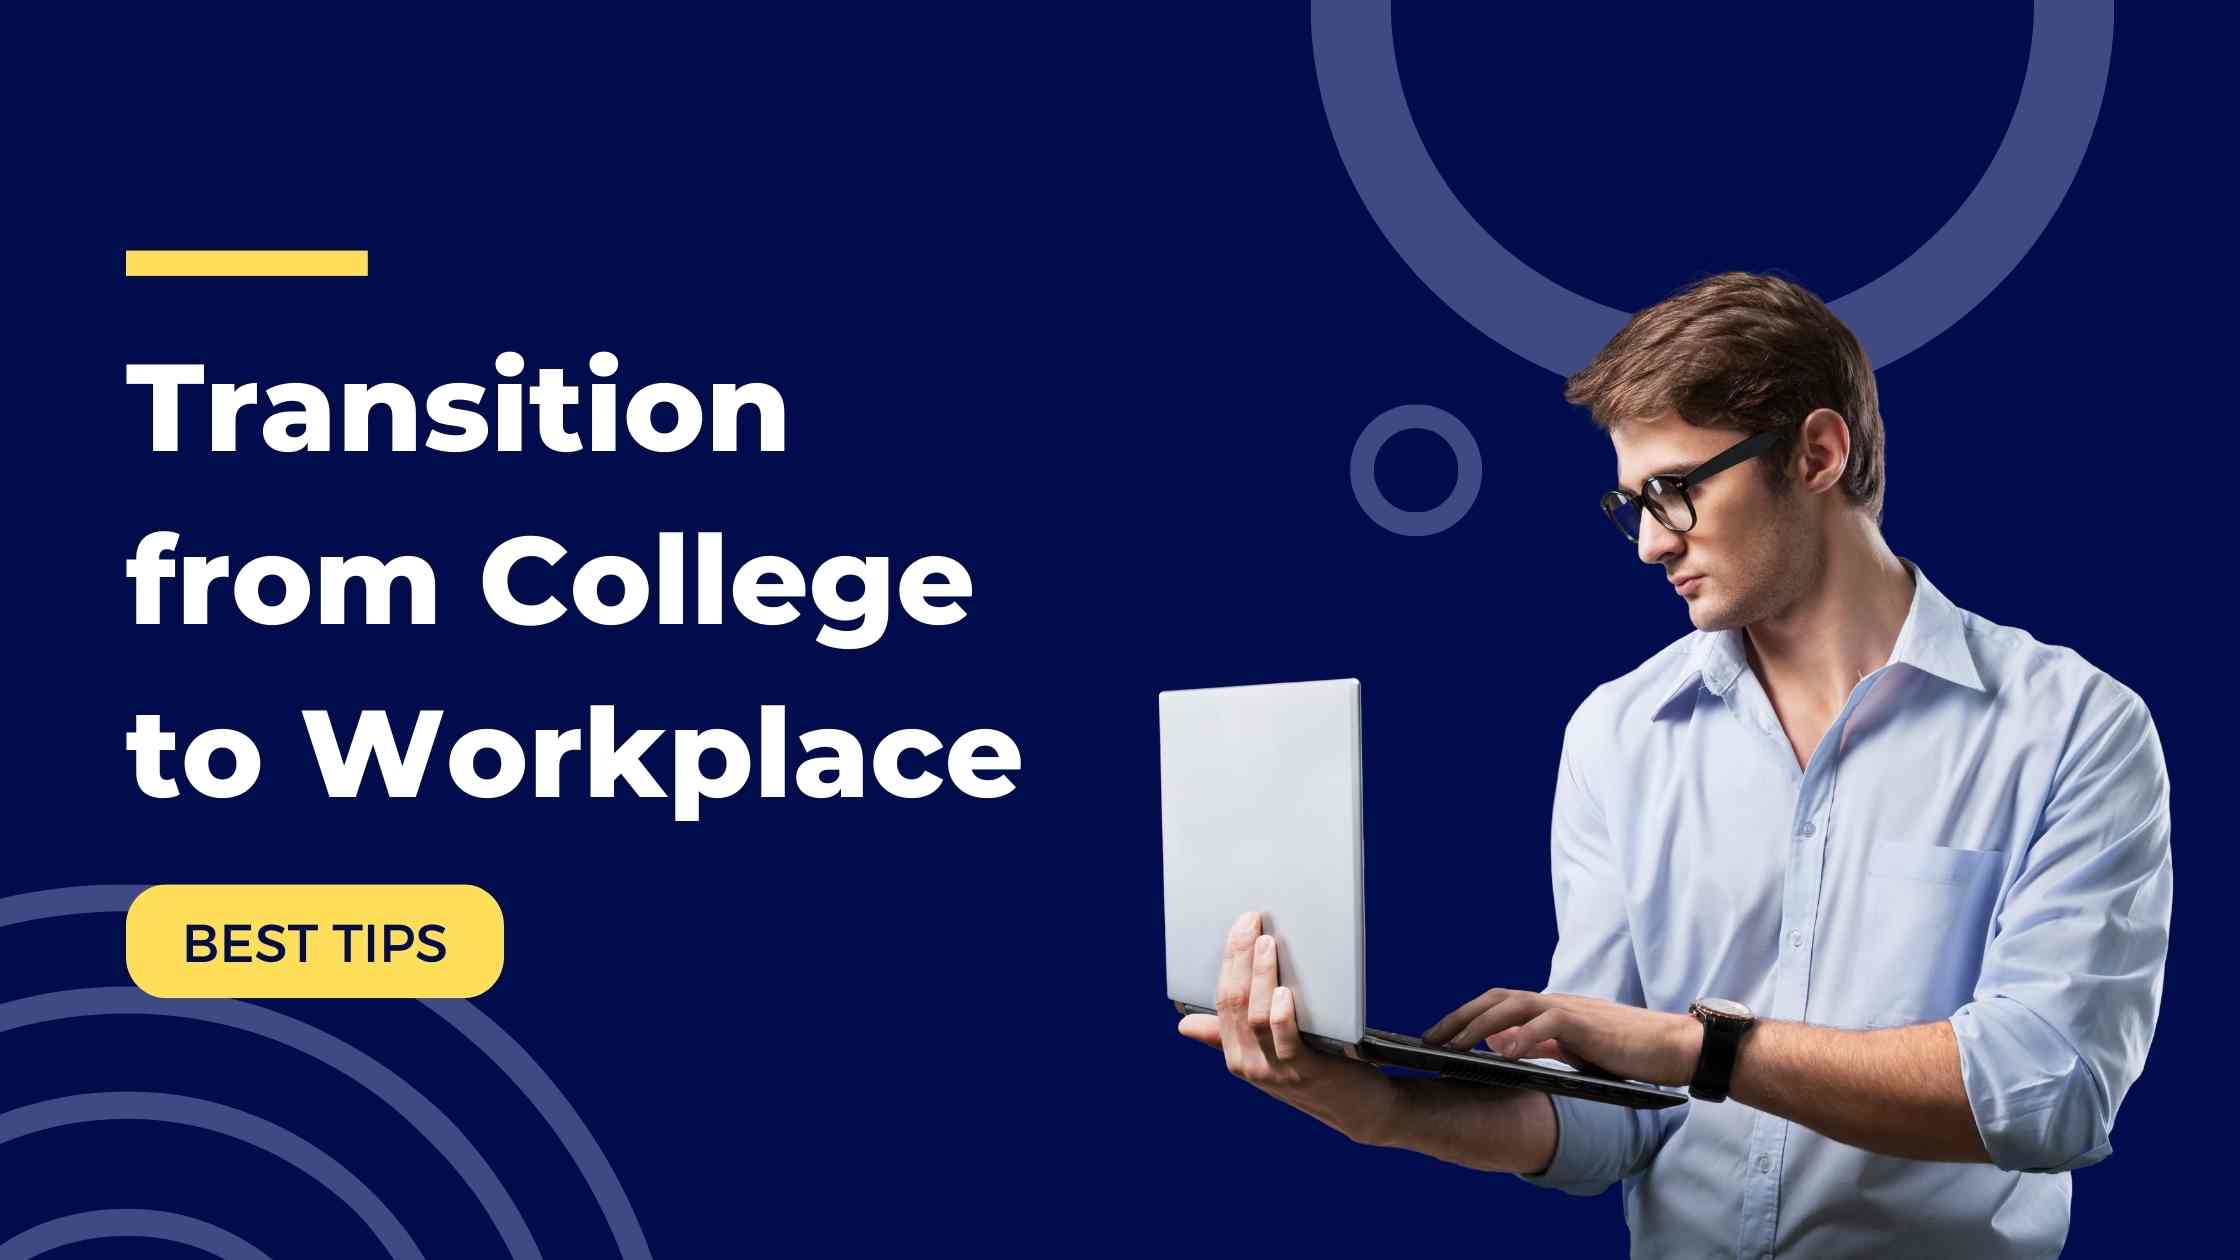 Best Tips For Tackling the Transition from College to Workplace